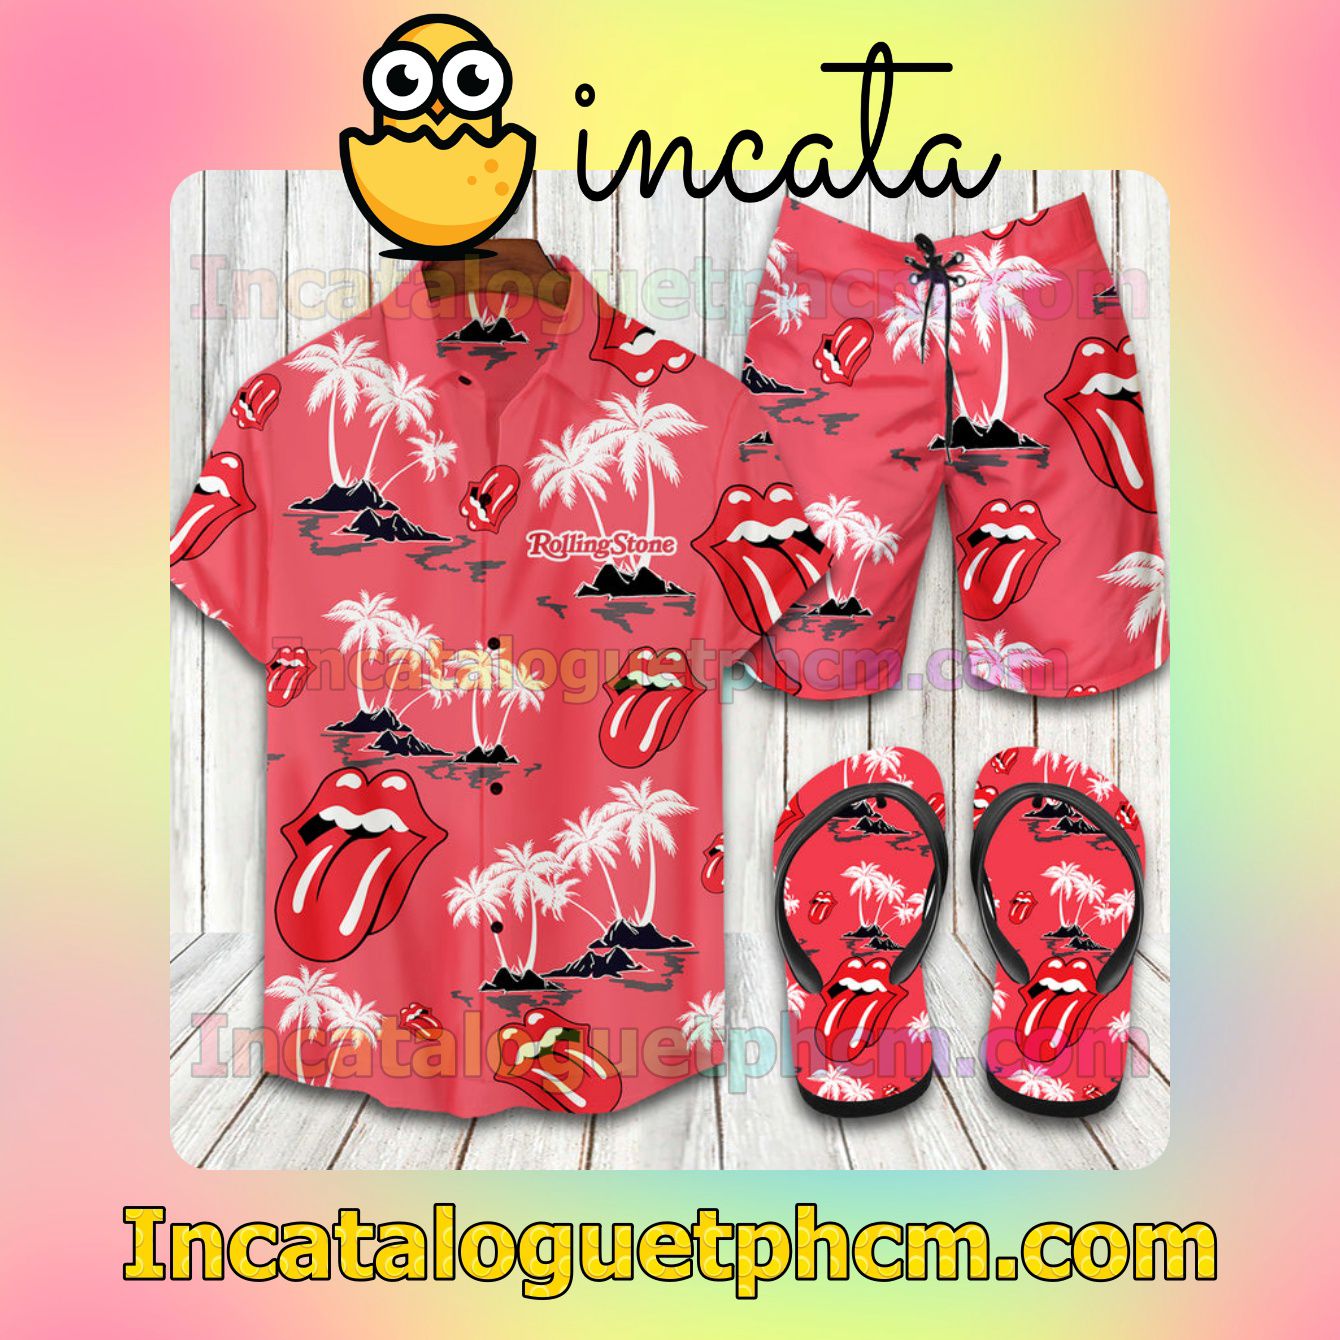 The Rolling Stones Aloha Shirt And Shorts